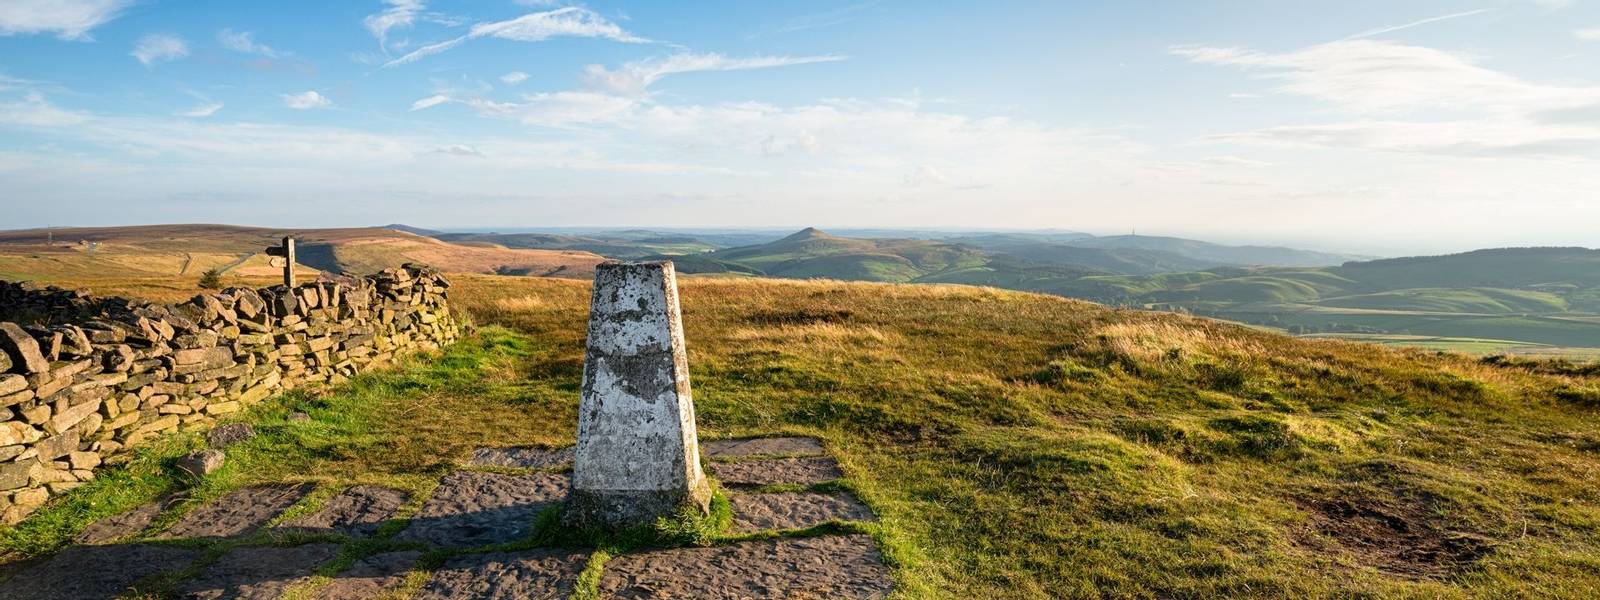 The Trig Point on top of Shining Tor in the Cheshire Peak District